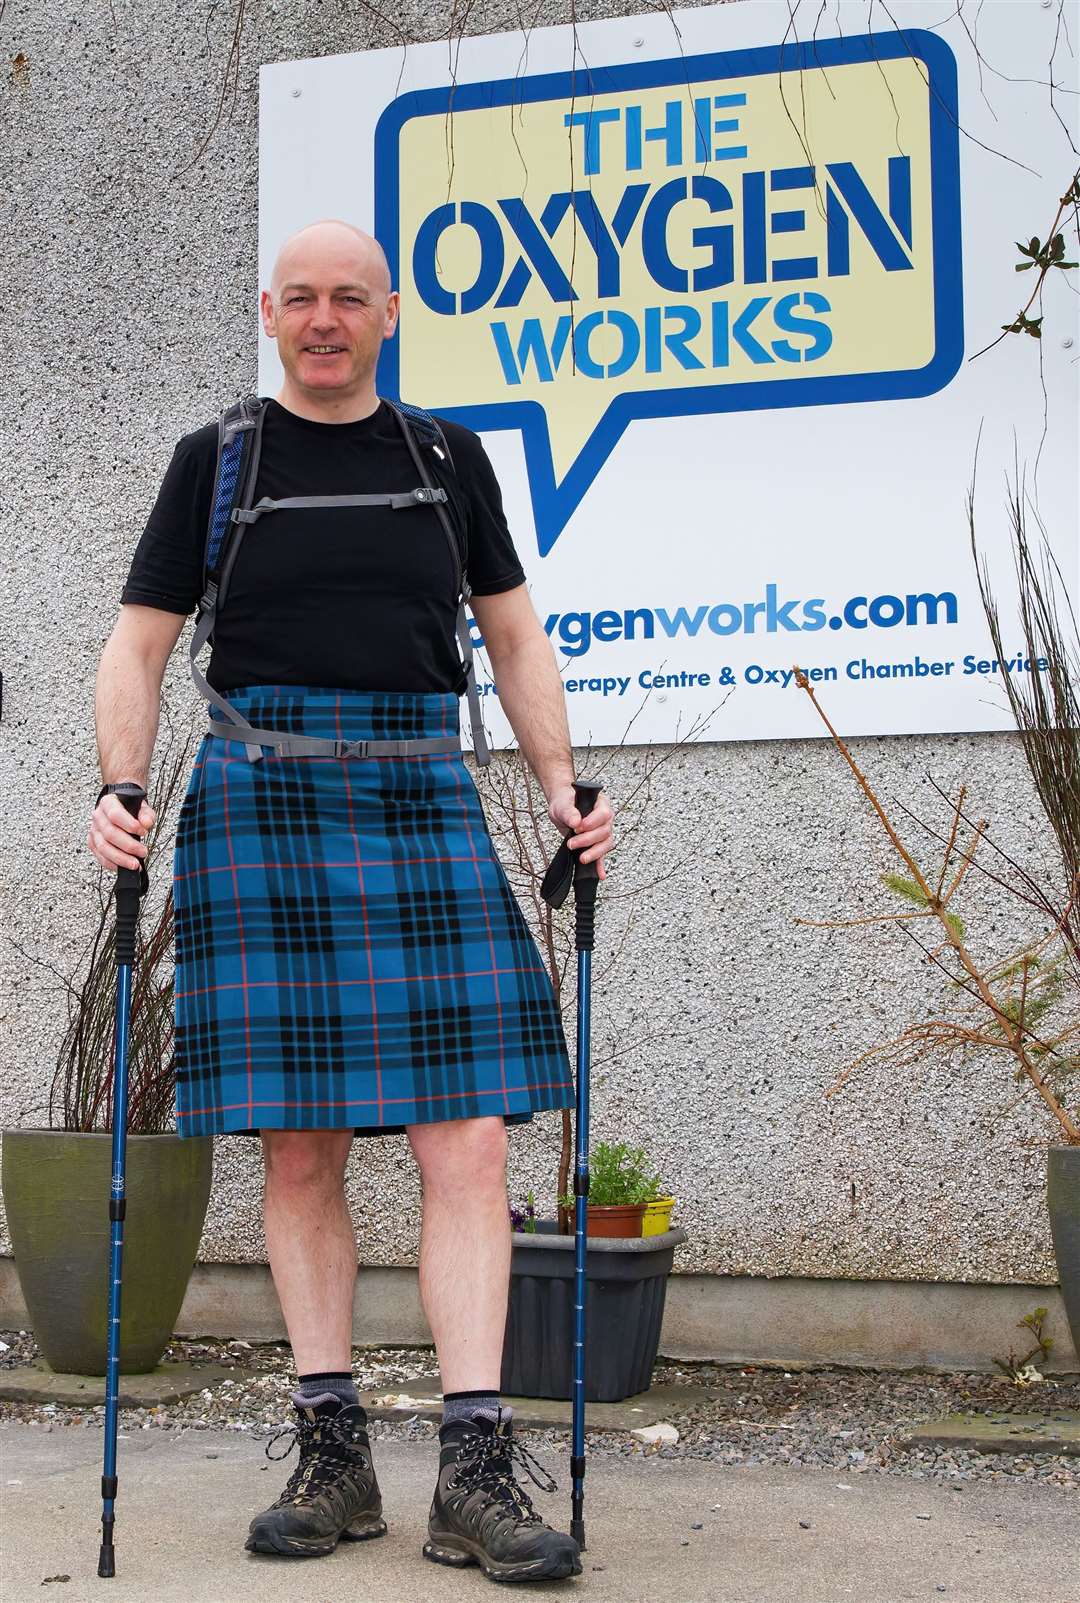 Colin MacLeod is preparing to do a kilt walk for the Oxygen Works. Picture: Donald Cameron